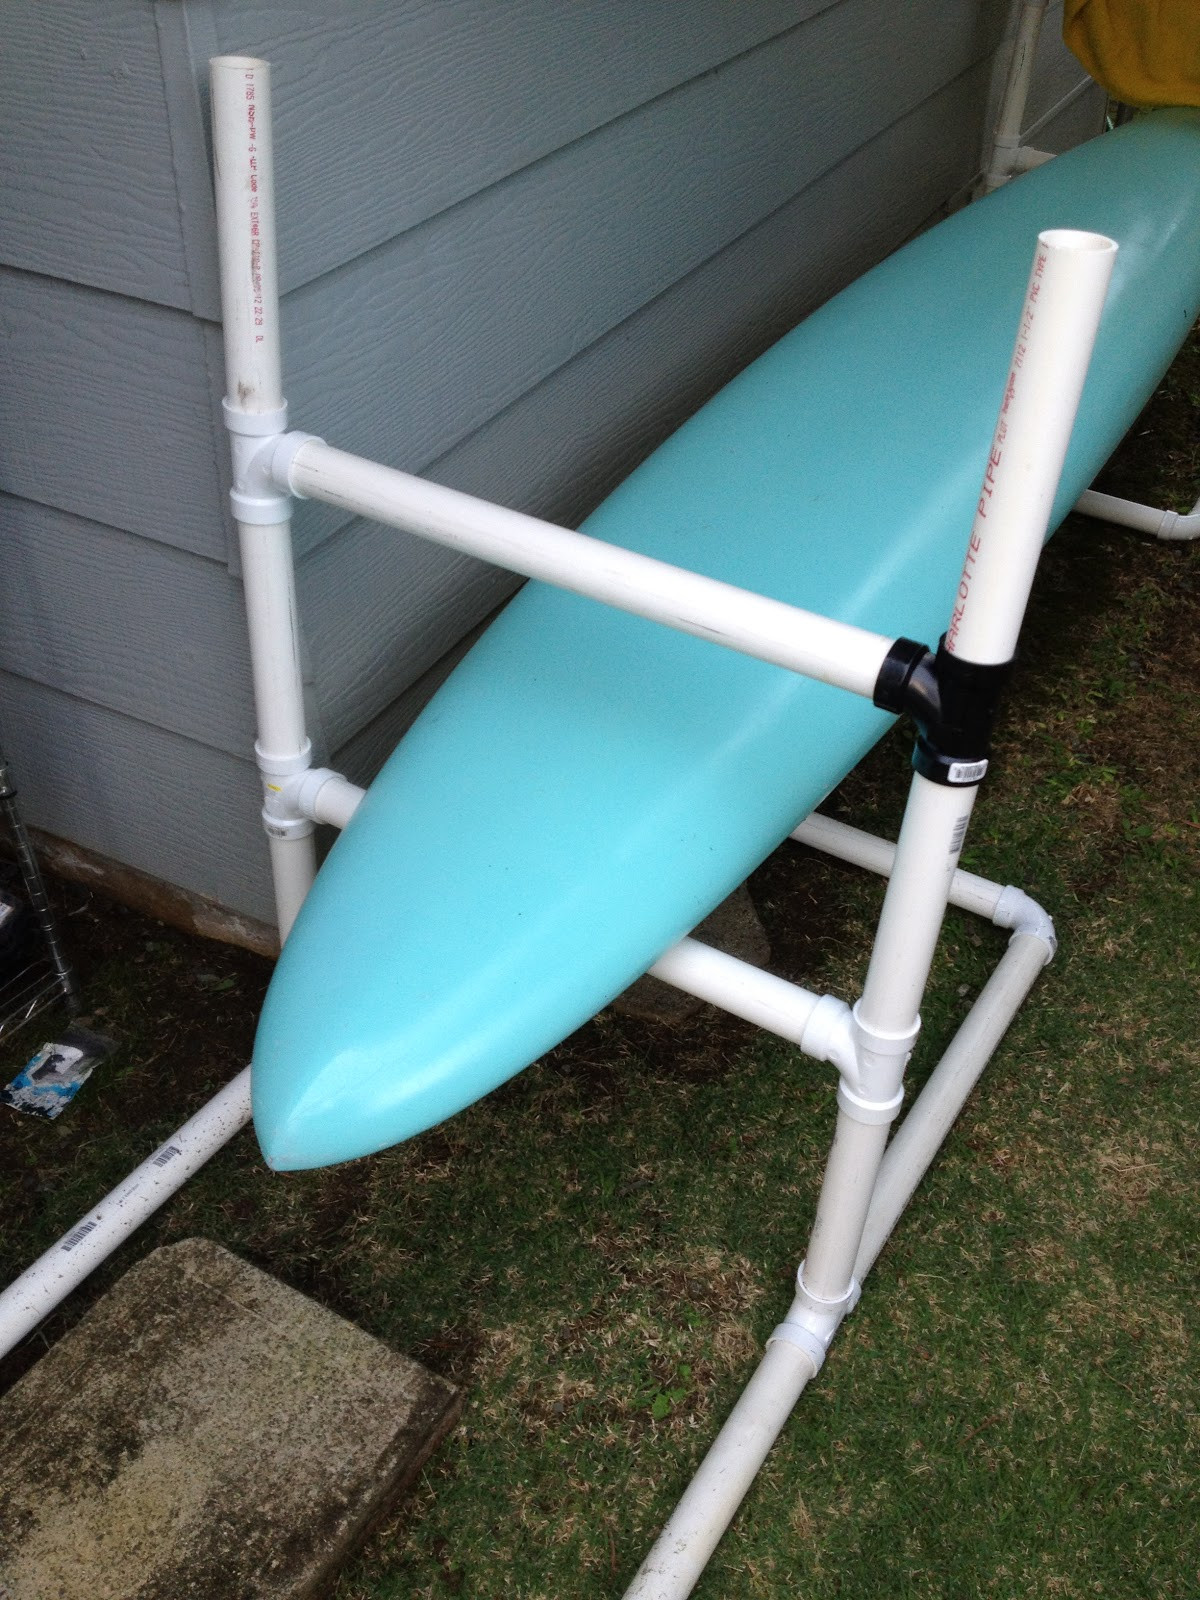 DIY Paddle Board Rack
 SwimKat How to Build a Prone Paddleboard Rack